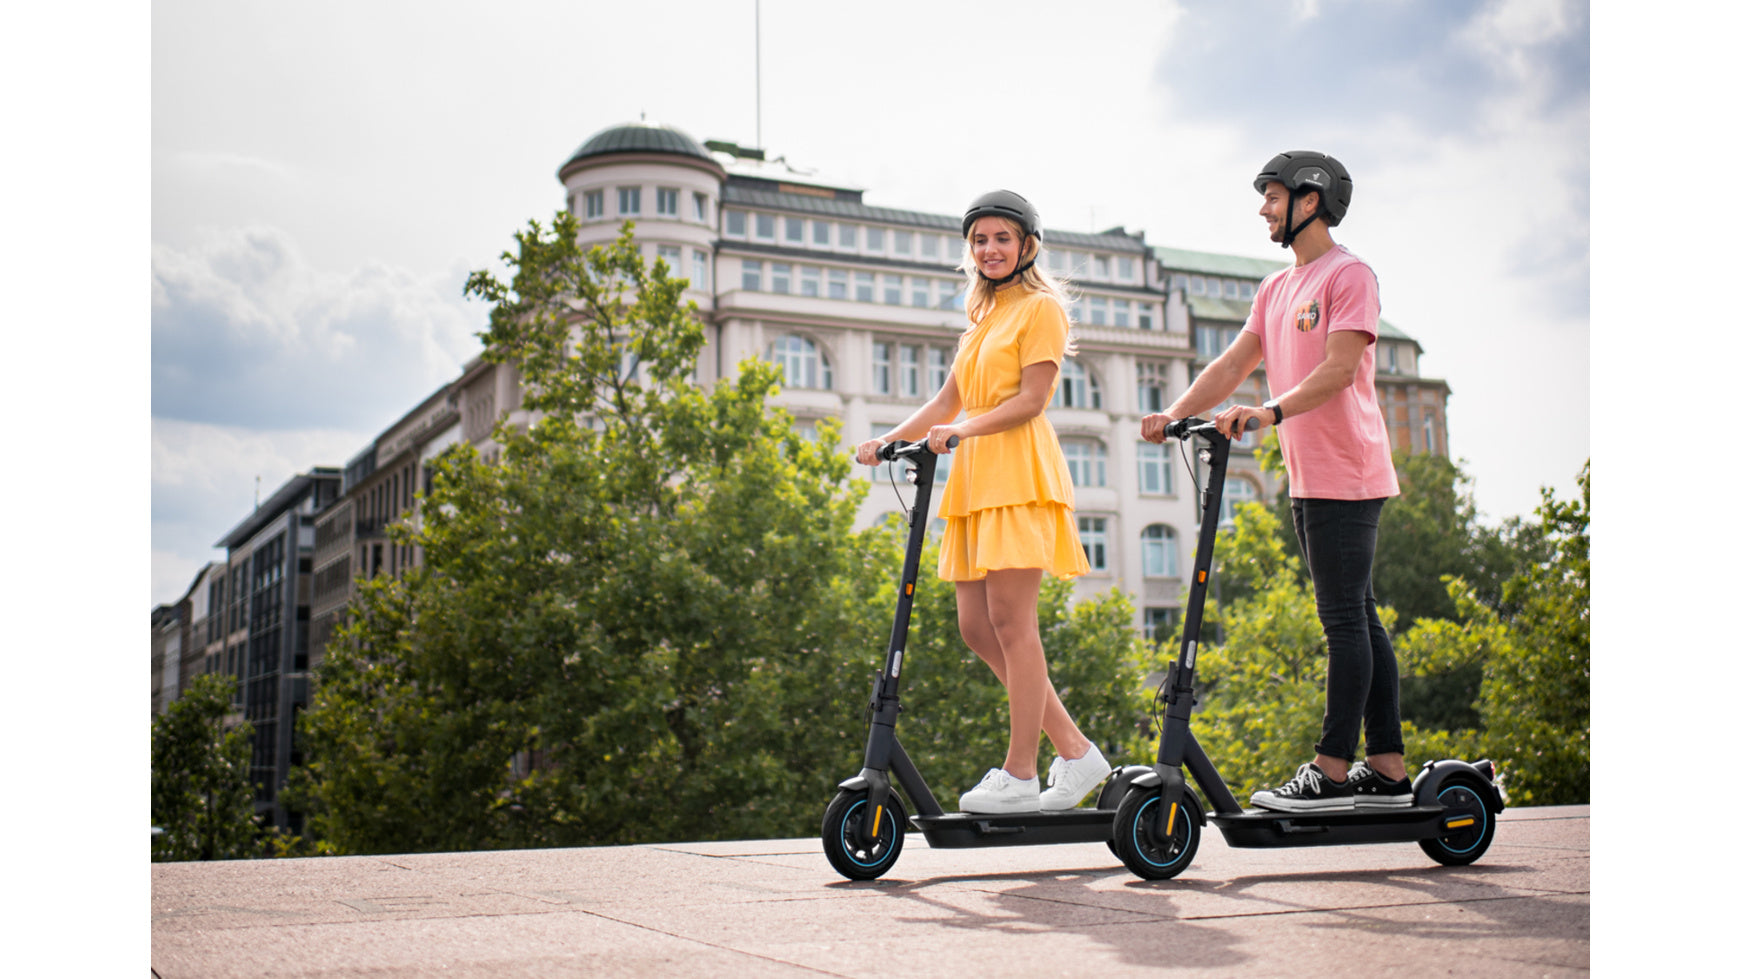 Ninebot KickScooter MAX G30D II powered by Segway – BE-SCooTER